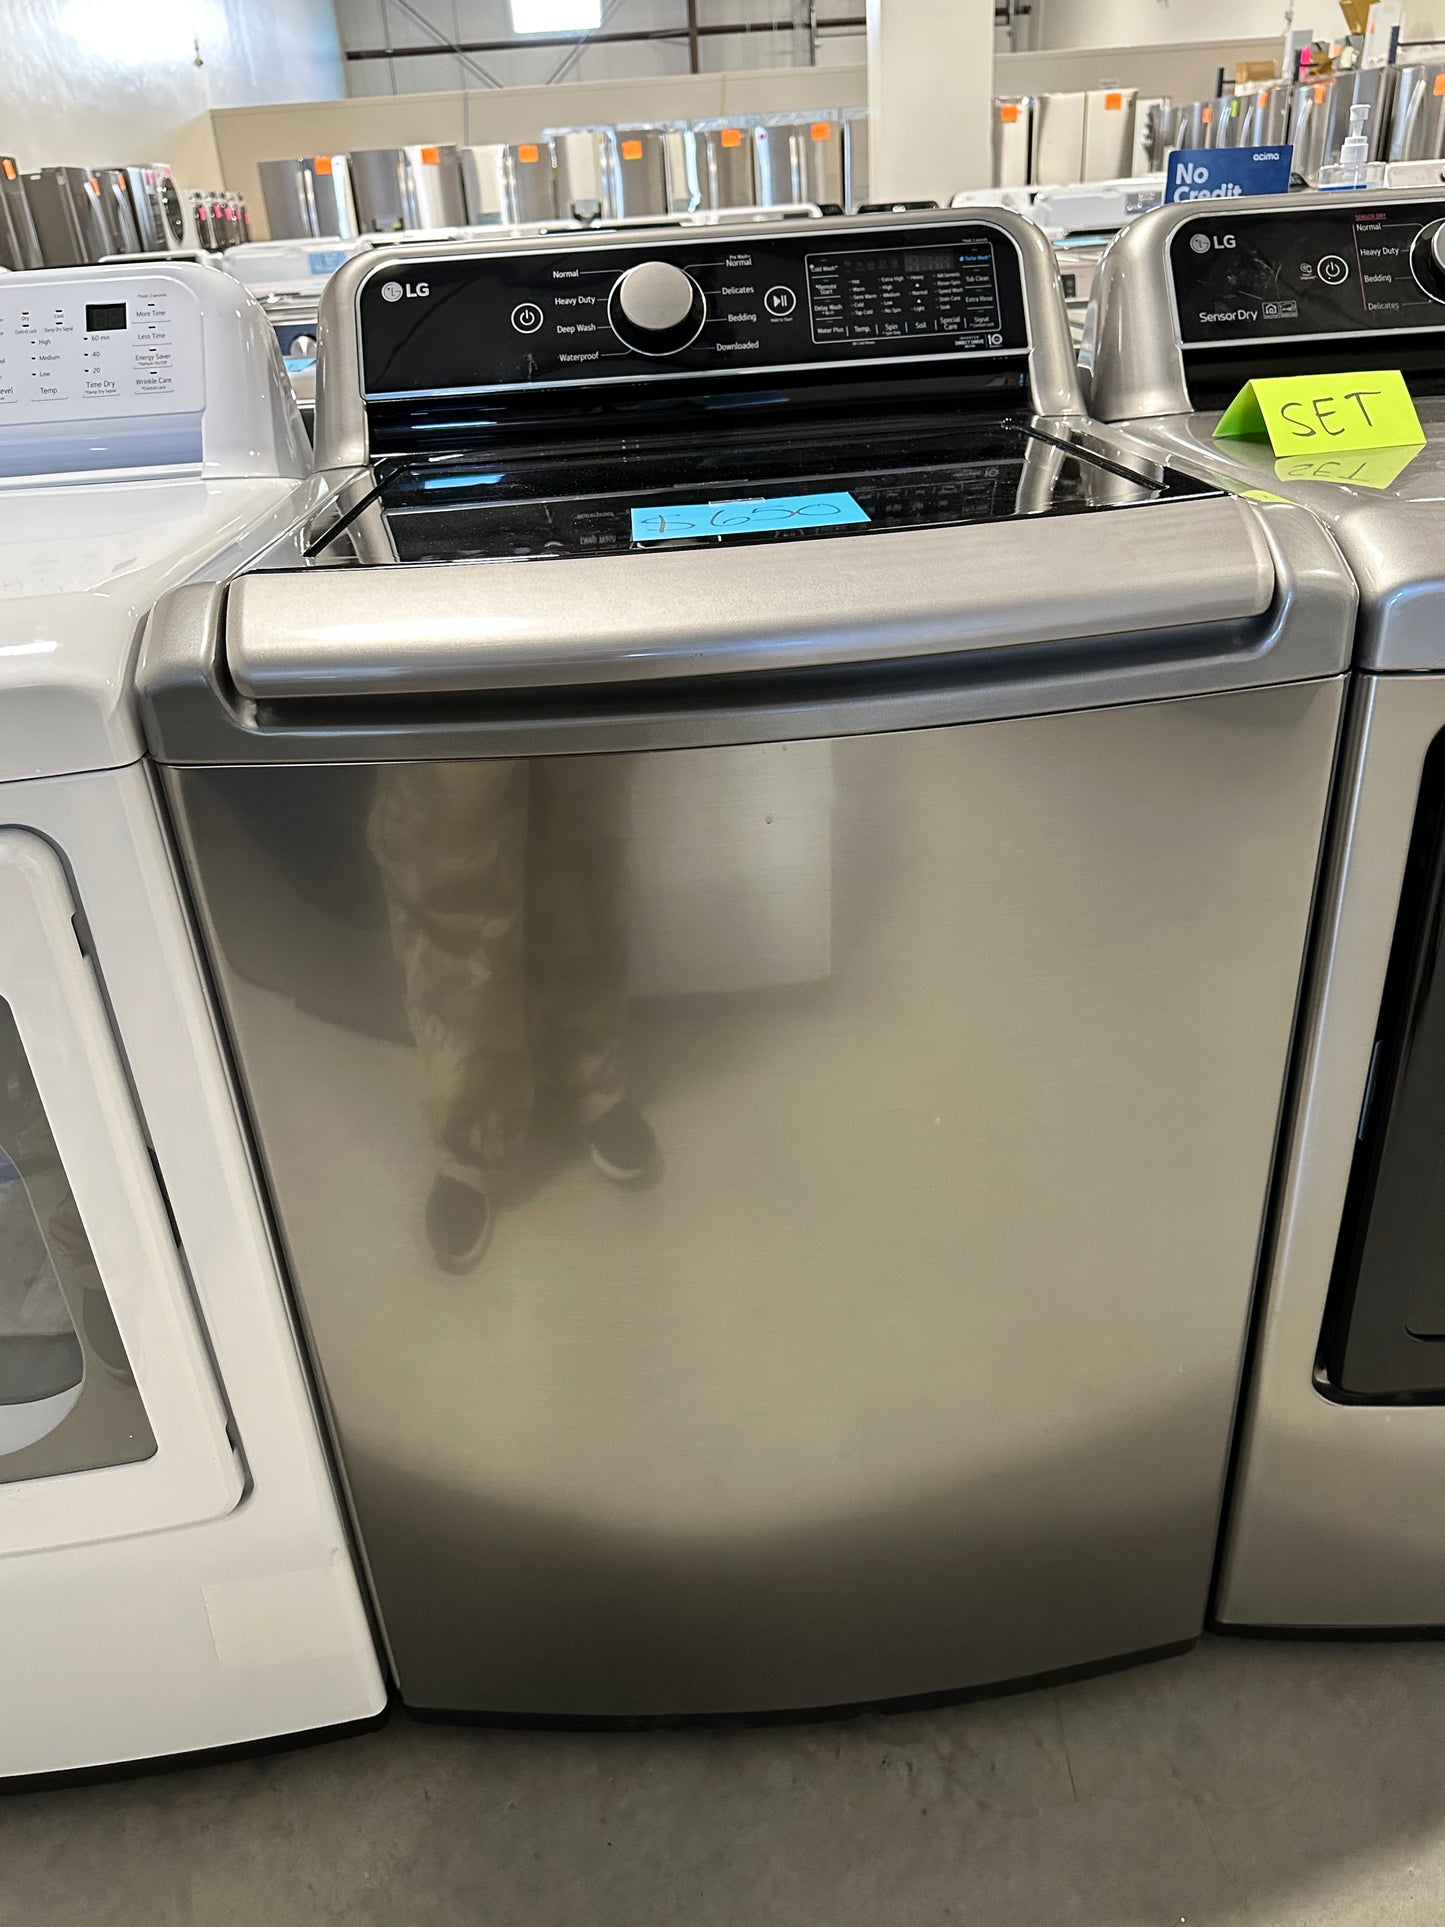 GREAT NEW 5.5 CU FT TOP LOAD WASHING MACHINE - WAS12662